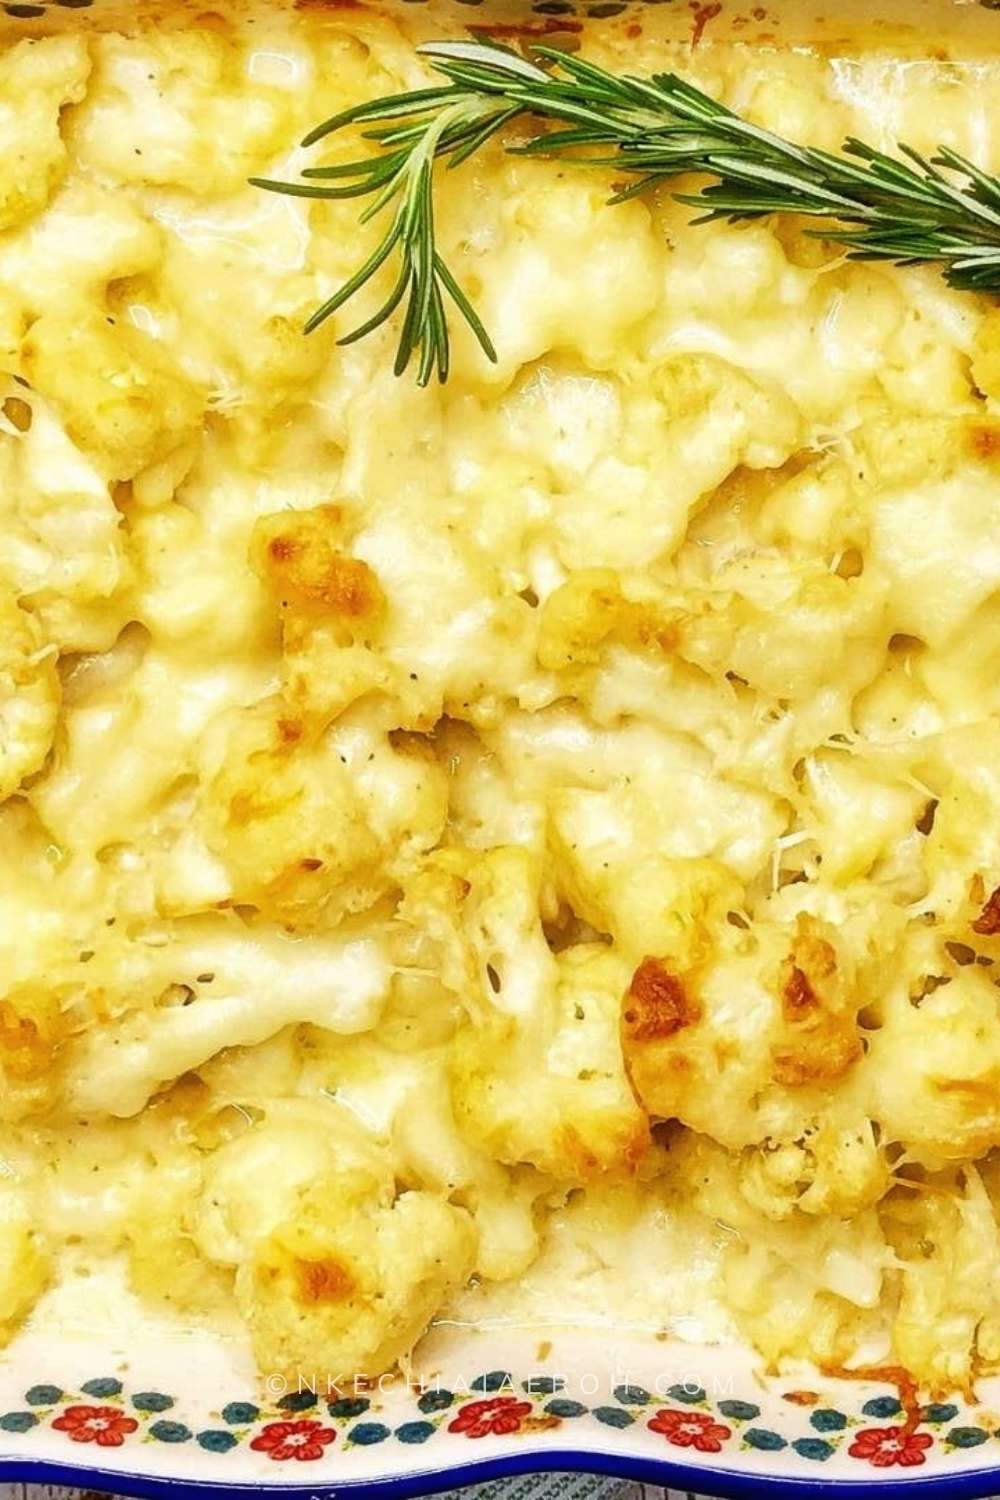 The best Cauliflower Mac and Cheese Incredibly easy and healthy baked cauliflower "mac and cheese" - The best Thanksgiving veggie side! This meatless creamy, comforting, and cheesy cauliflower side is made with fresh cauliflower, some milk, and some cheeses – a perfect low-carb and low-calorie side dish for all your holiday cooking. With this easy cauliflower mac and cheese, you will forever enjoy a guilt-free and comforting healthy side, and you will never miss mac and cheese. #lowcarb #cauliflower #Thanksgivingrecipe #cauliflowermacandcheese #healthysidedish #meatlessmaindish #sidedish #cauliflowermac